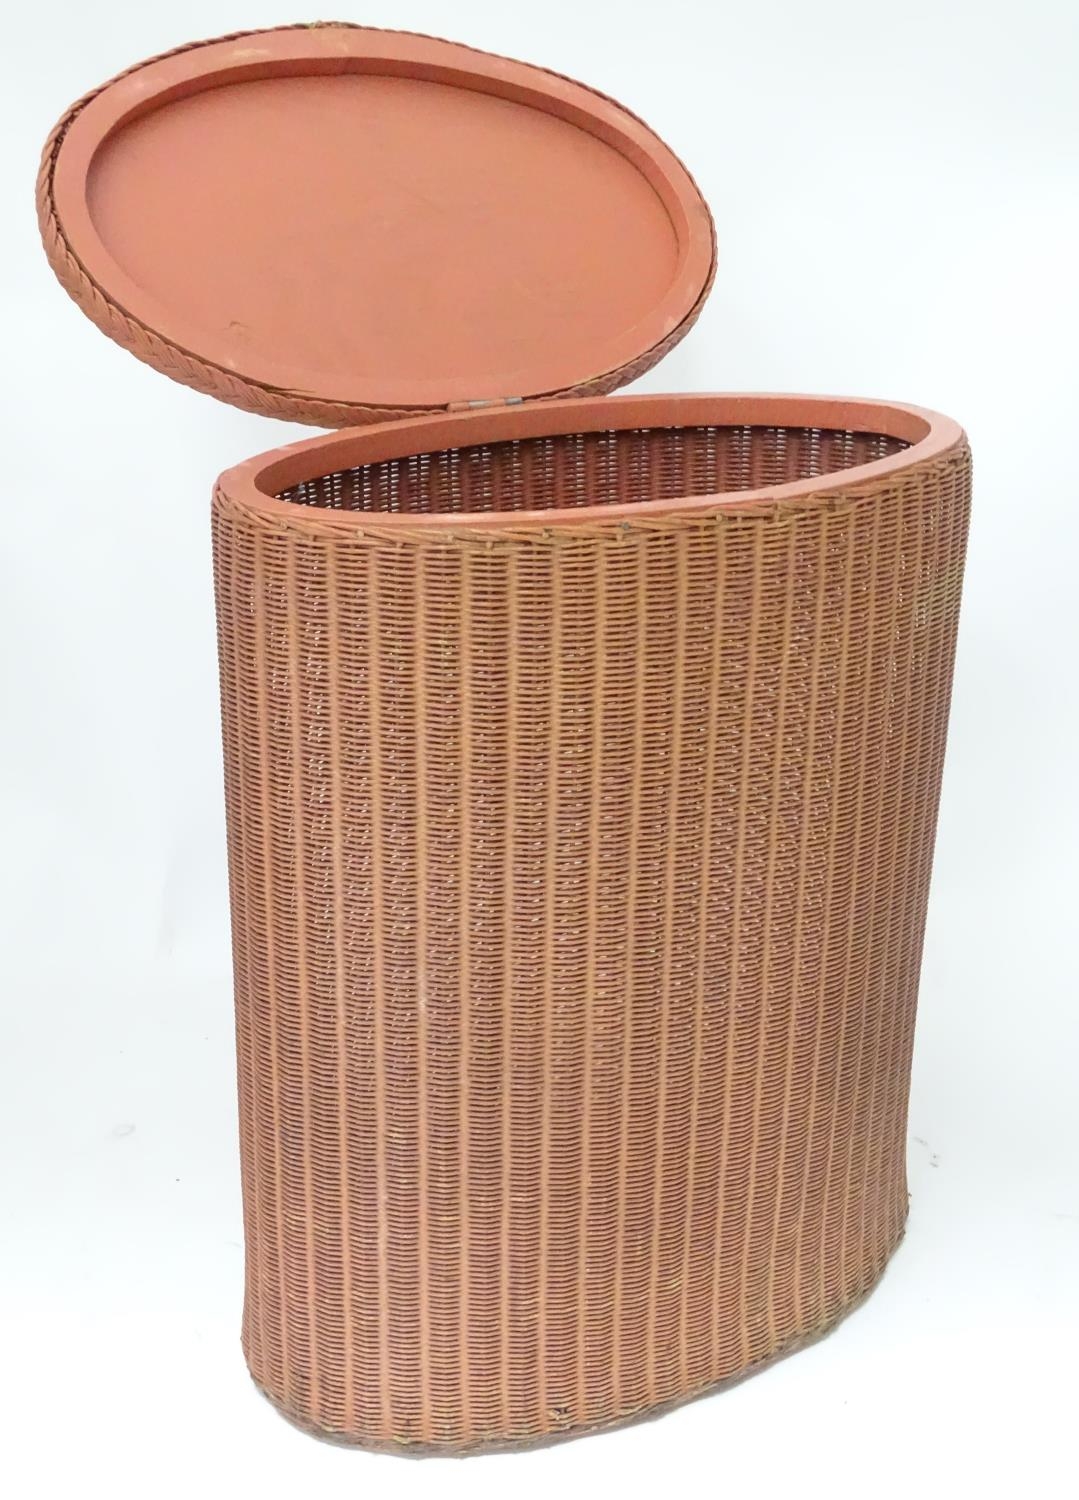 A Lloyd Loom style linen basket of oval form Please Note - we do not make reference to the condition - Image 3 of 7